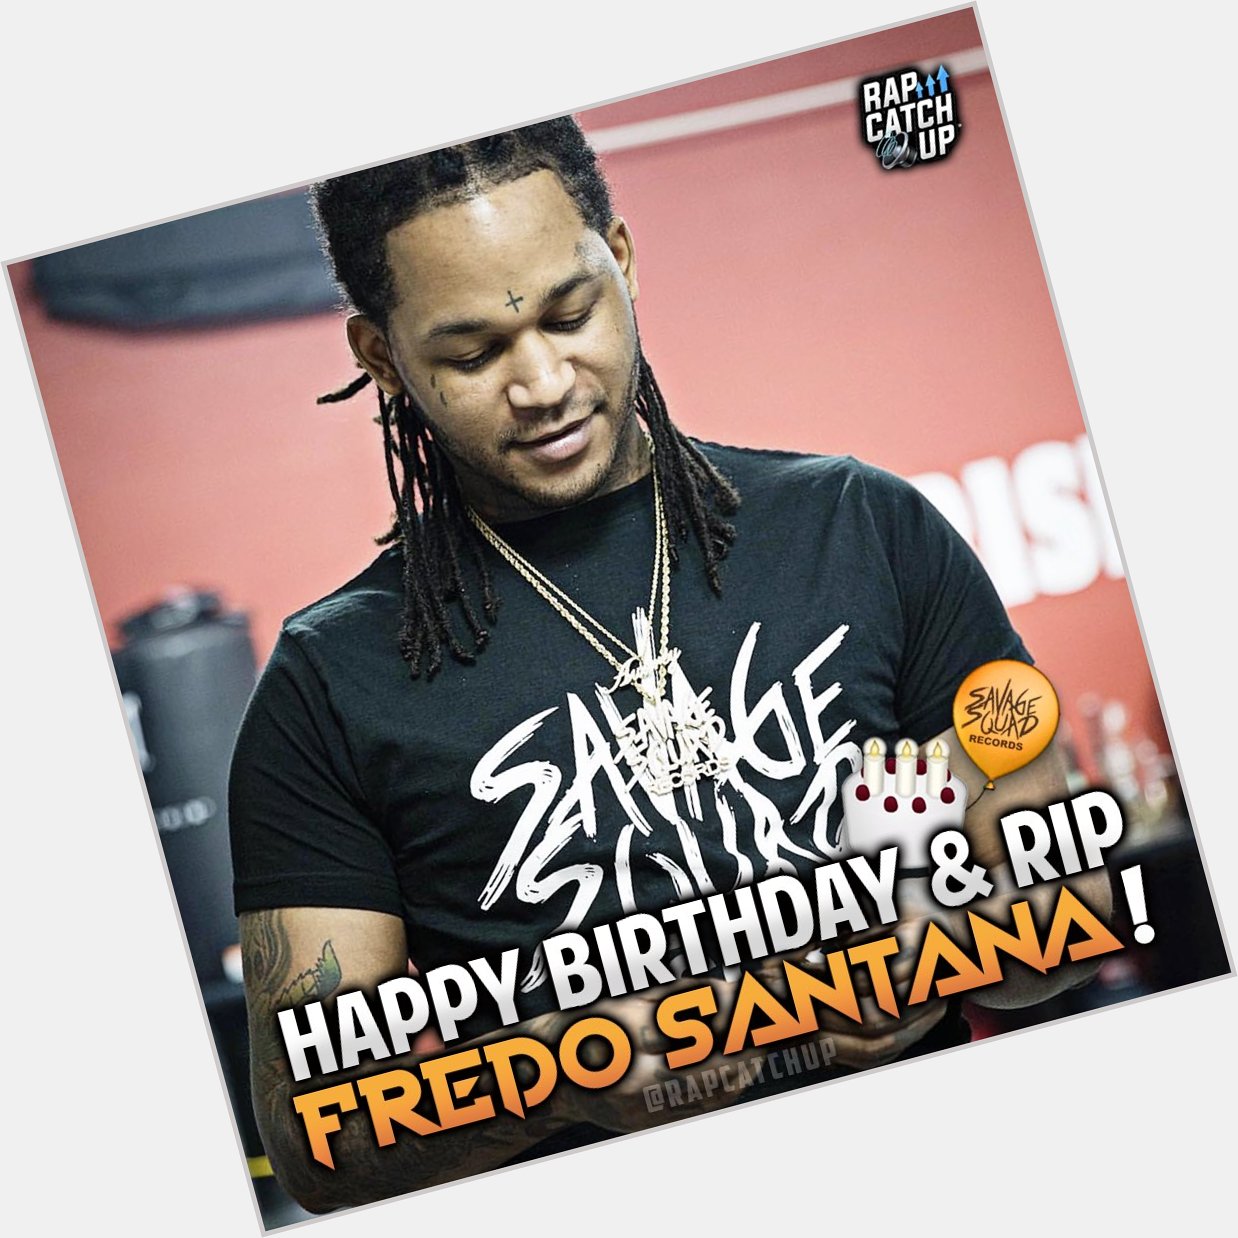 Happy Birthday to Derrick Fredo Santana Coleman. He would have turned 31 years old today, RIP Fredo 